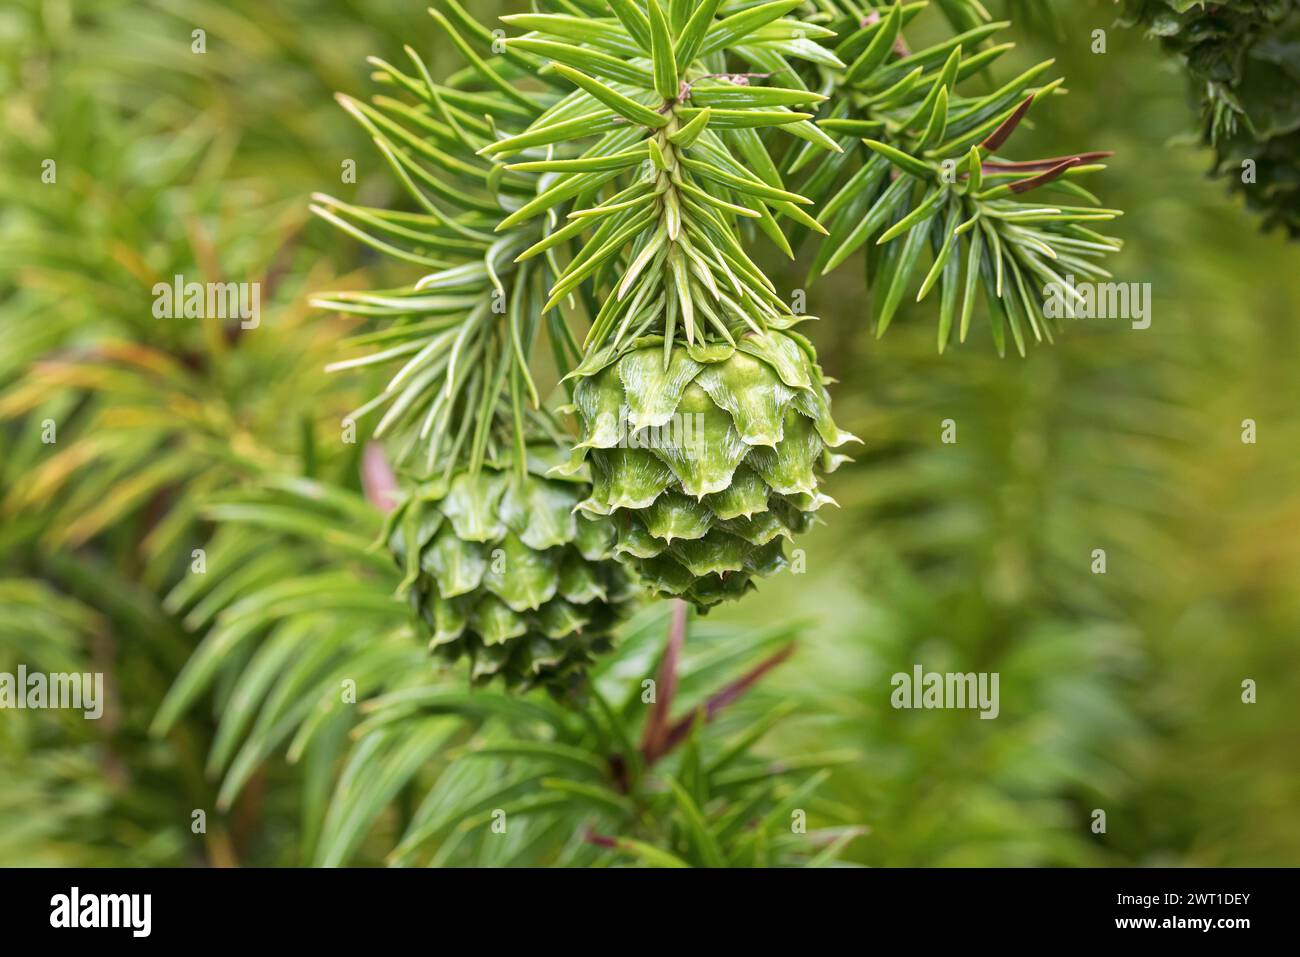 China fir, Chinese fir (Cunninghamia lanceolata), branch with cones Stock Photo